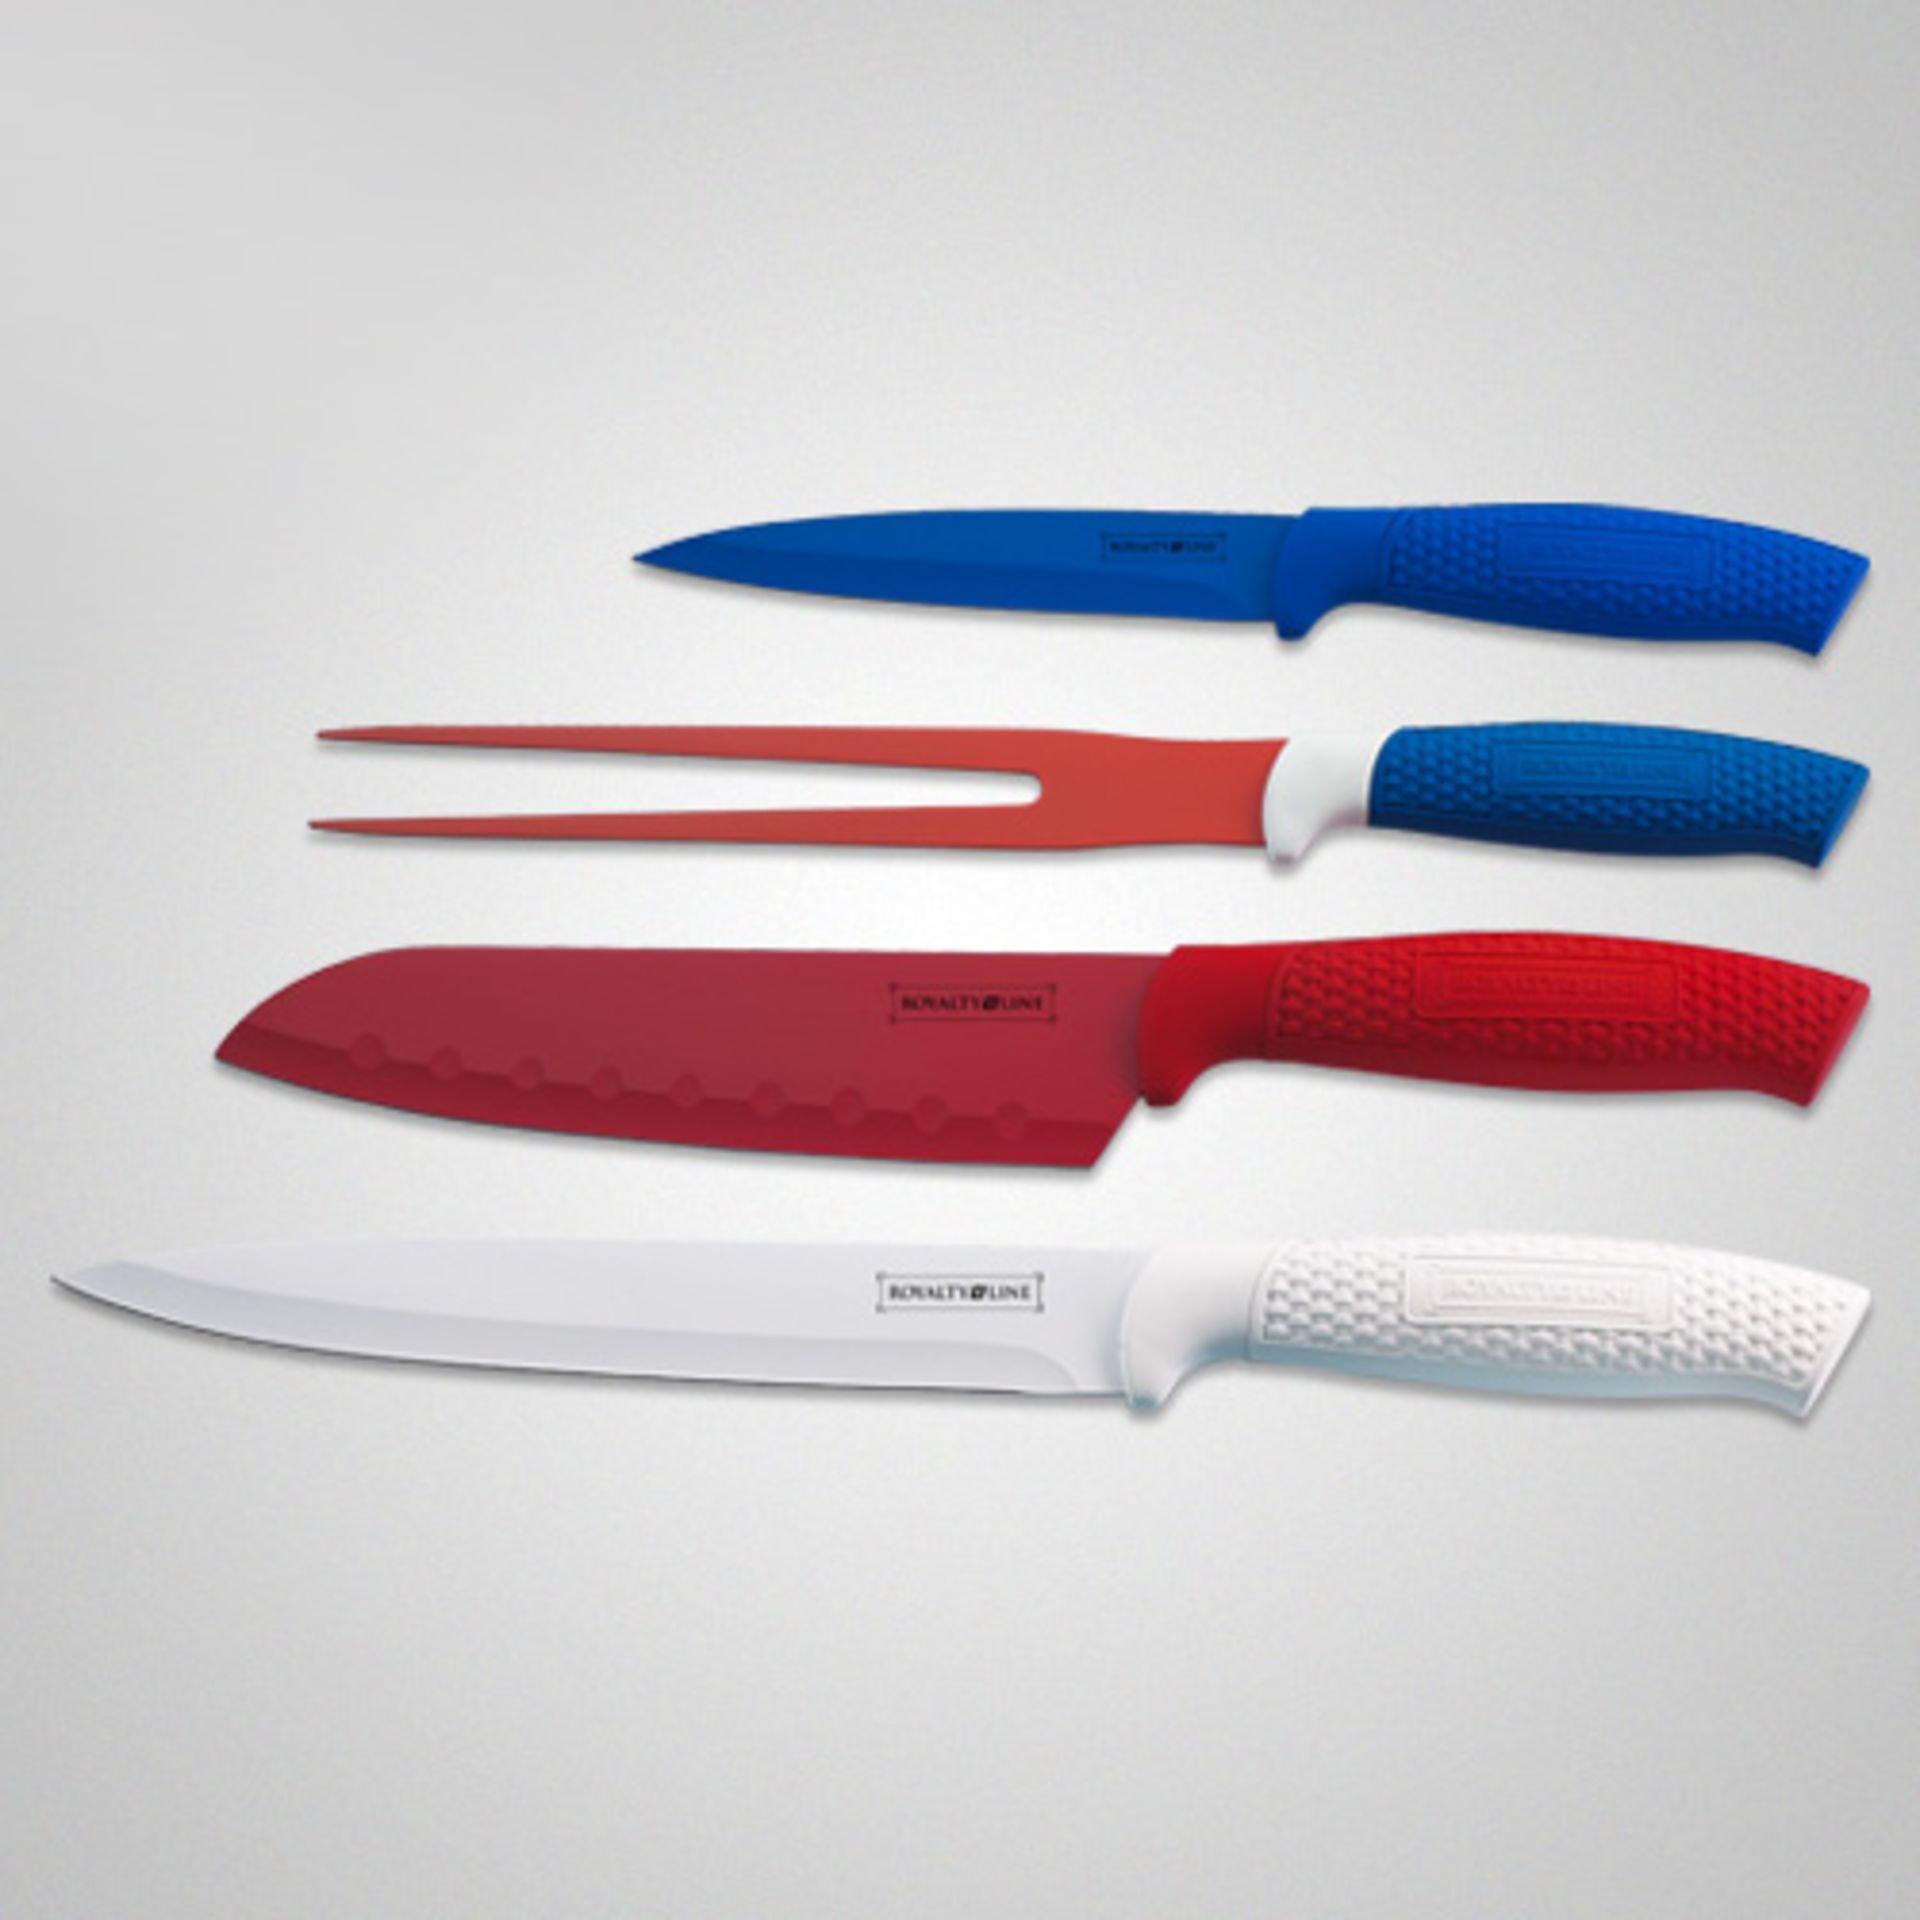 V Brand New Royalty 4 Piece Carving Knife Set In Display Box With Non-Stick Coating X 2 Bid price to